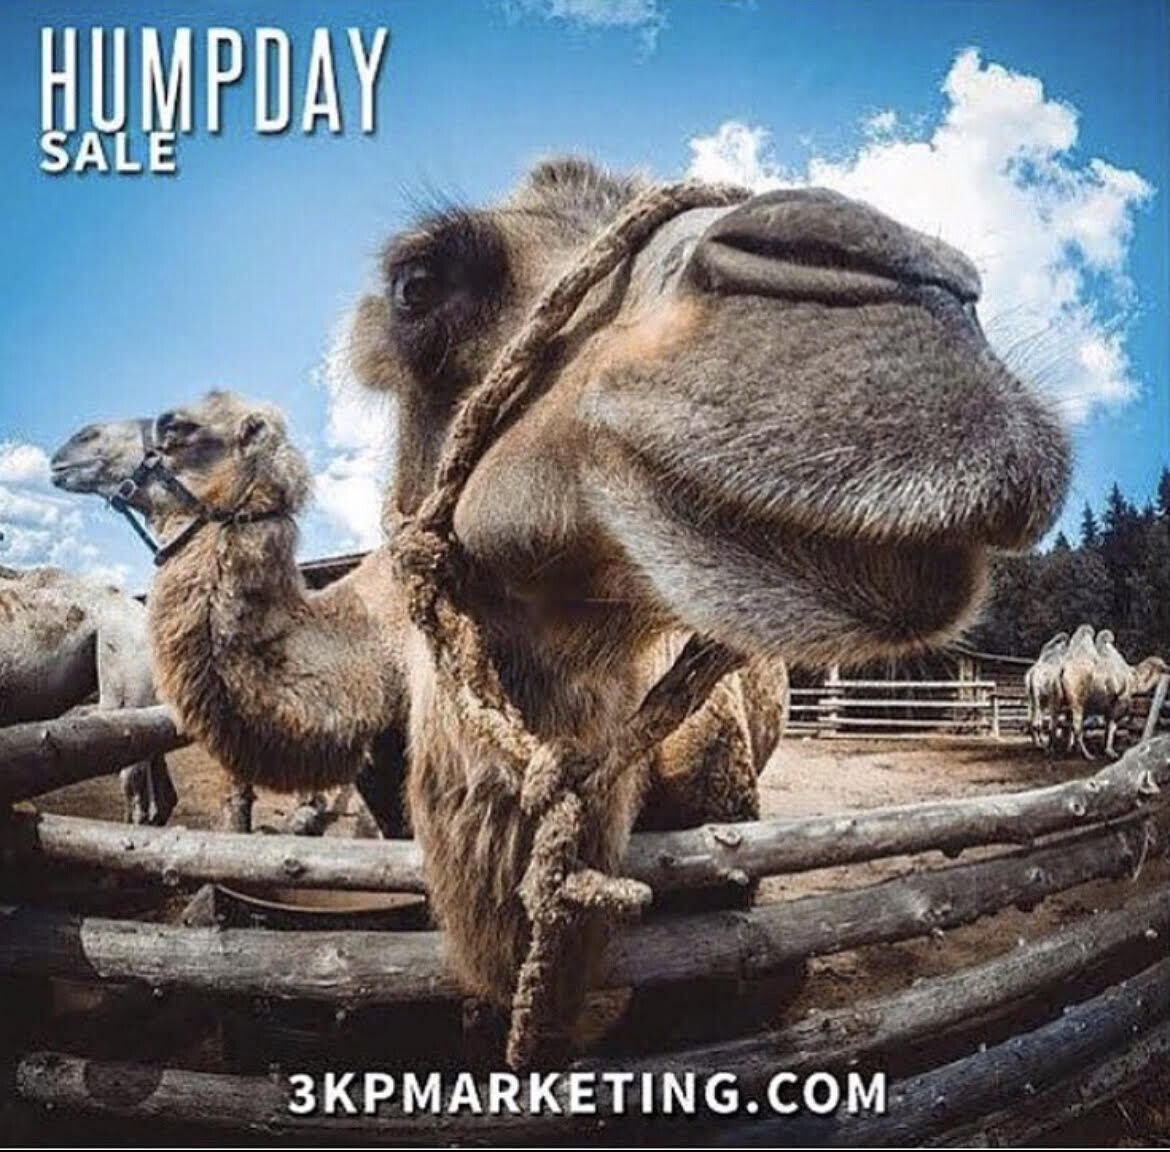 Humpday Sale